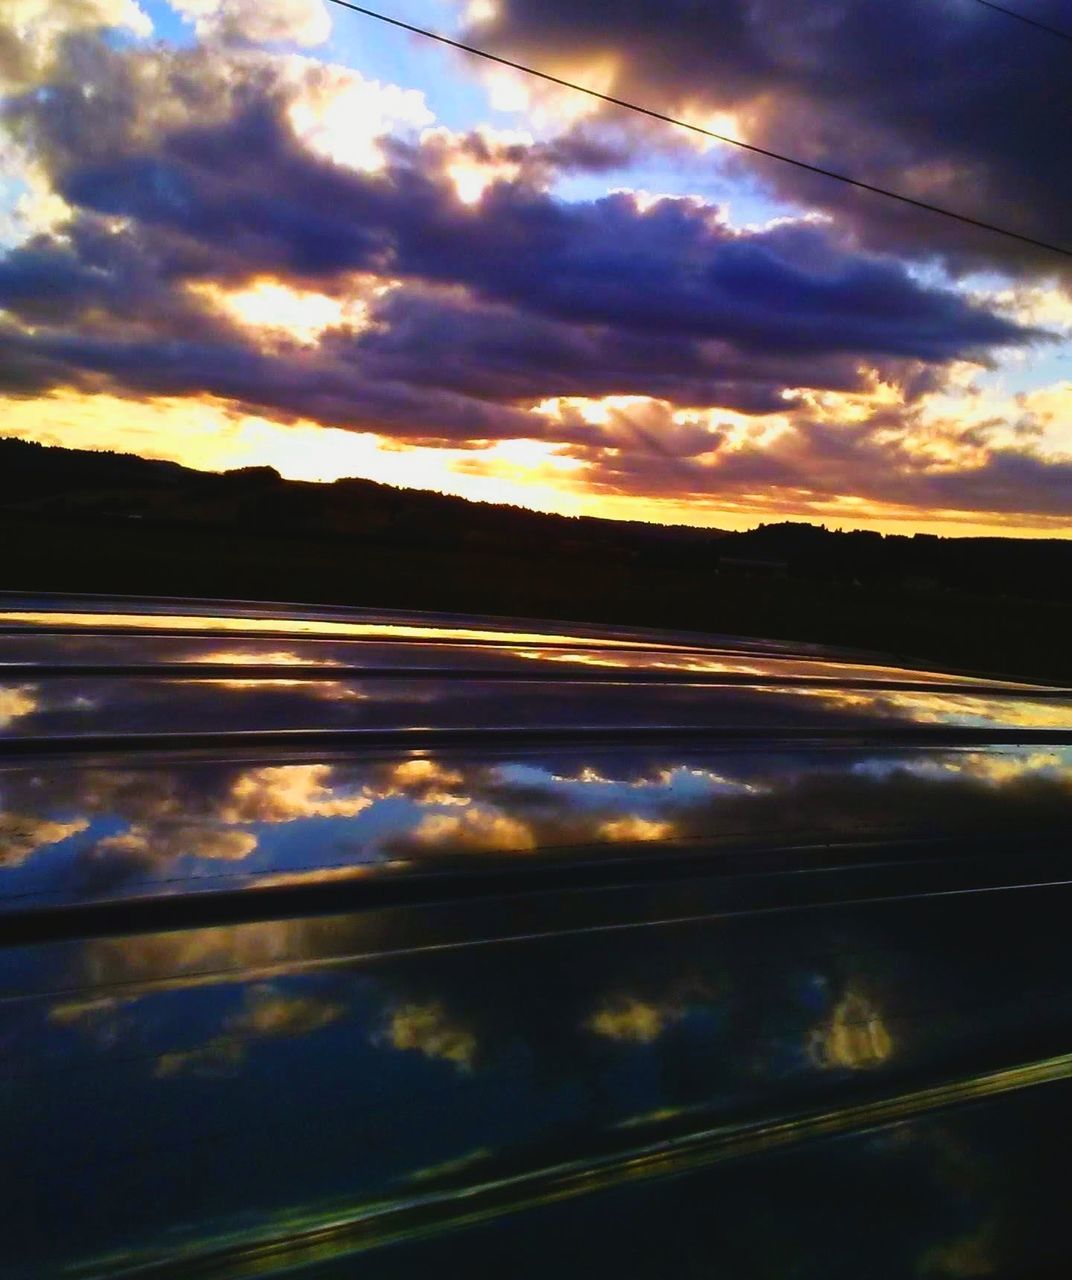 Thursday throwback from 2017 Sky reflections on my car Archive 2017 Carries Archives August 2017 Collection Reflection_collection Cloud Reflections Summers Gone By The Past Summers From My Past Summer Nights August Nights Summer Sunsets  Past Sunsets Sunset Cloud Reflections Before Dusk Sunset Spectacular Sky Illuminations Natural Light Photography Illuminated Outdoors Car Top Car Roof Reflections Summer Reflections Summer Memories Archived Memories Forever Summer Summer Exploratorium Summer Sunset Reflection Glowing Reflection Beauty In Reflections Beautiful Sunset Memories